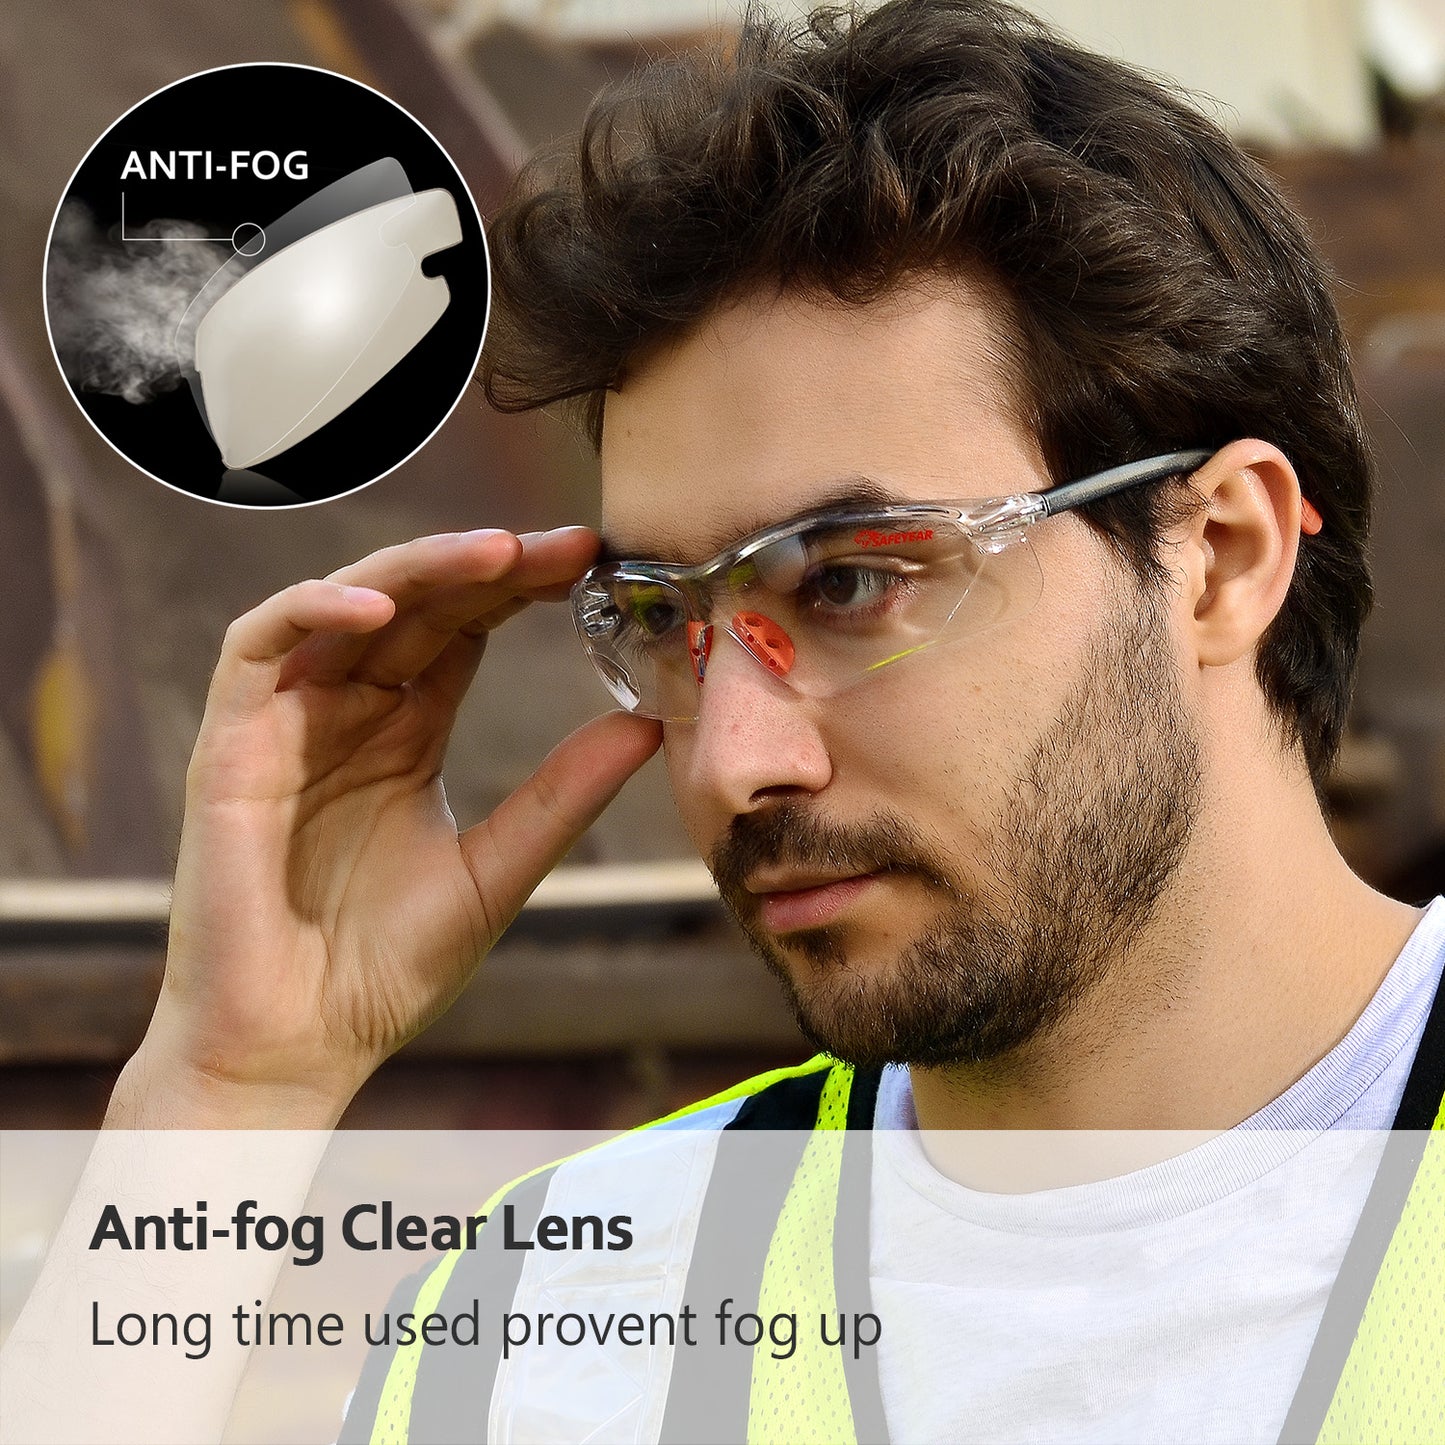 SAFEYEAR Anti Scratch Safety Glasses- SG003 HD Anti Fog Work Glasses for Women and Men Adults No-Slip Grips, VU Protection Safety Goggles for DIY, Chemistry Lab, Welding, Grinding,Garden